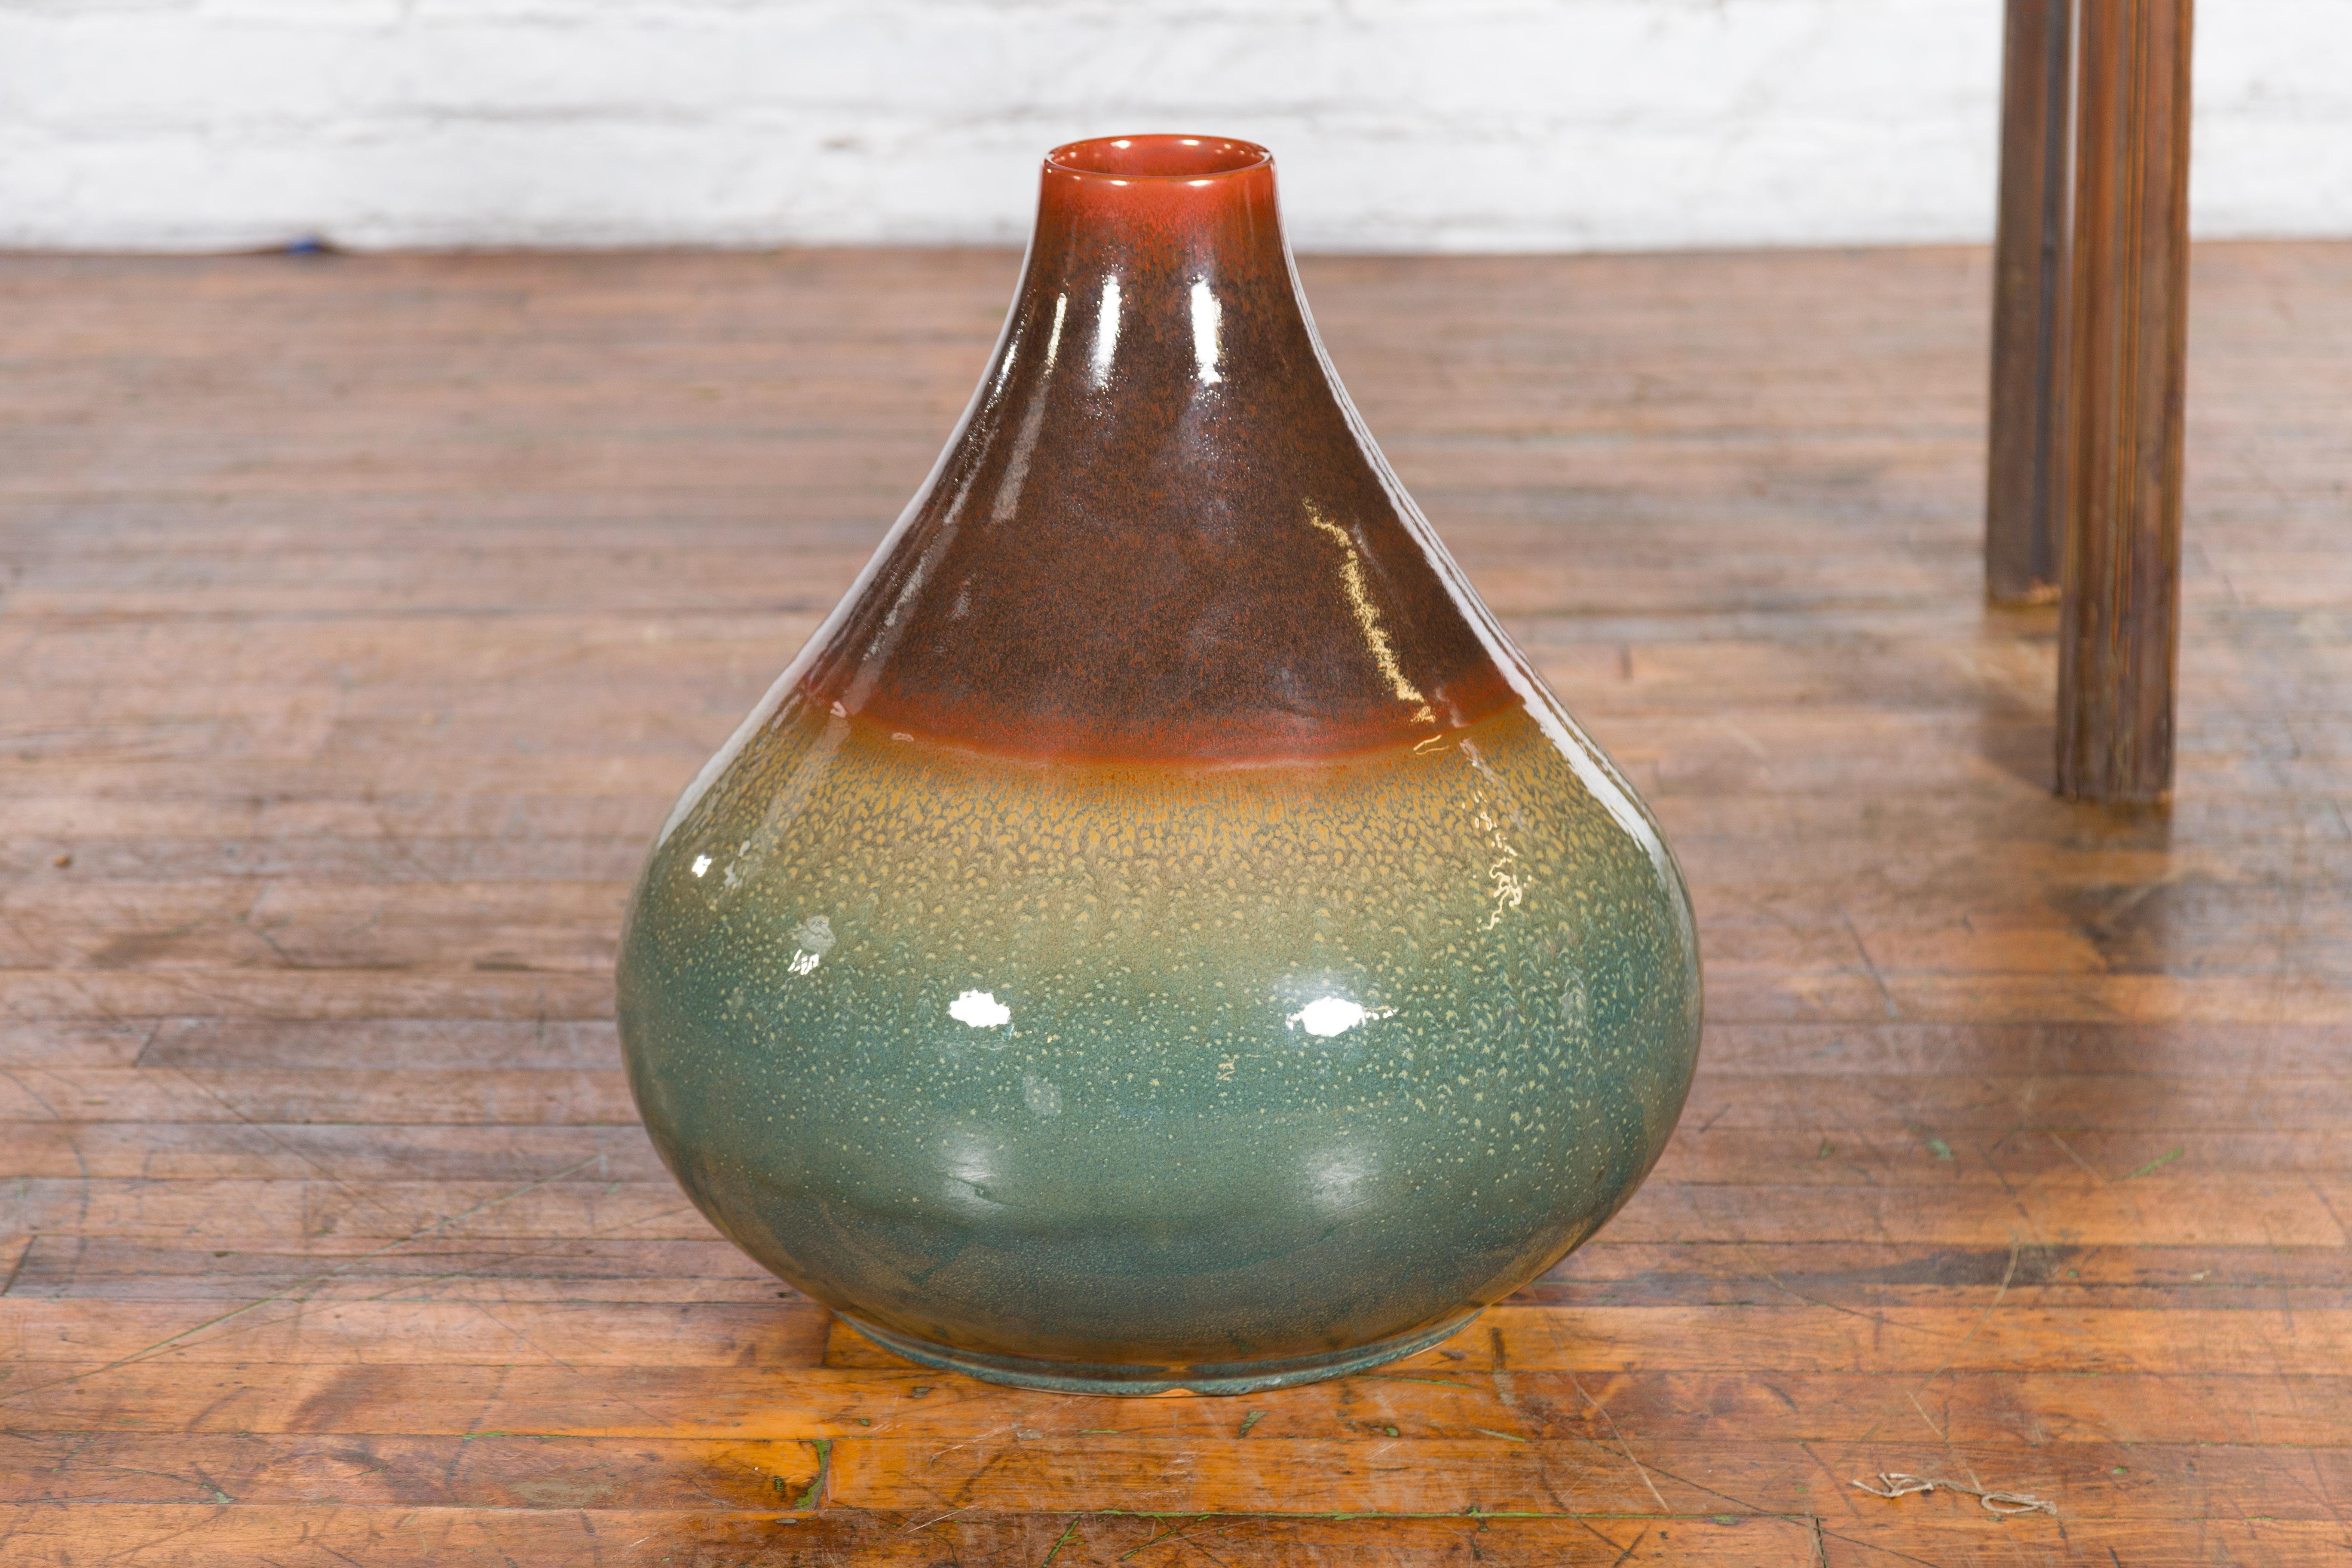 A large contemporary Northern Thai jar from the Prem Collection, with green and brown glaze. Charming our eyes with its pure lines and complimenting colors, this vase was born in Chiang Mai, northern Thailand. Featuring a narrow neck with a 3.5